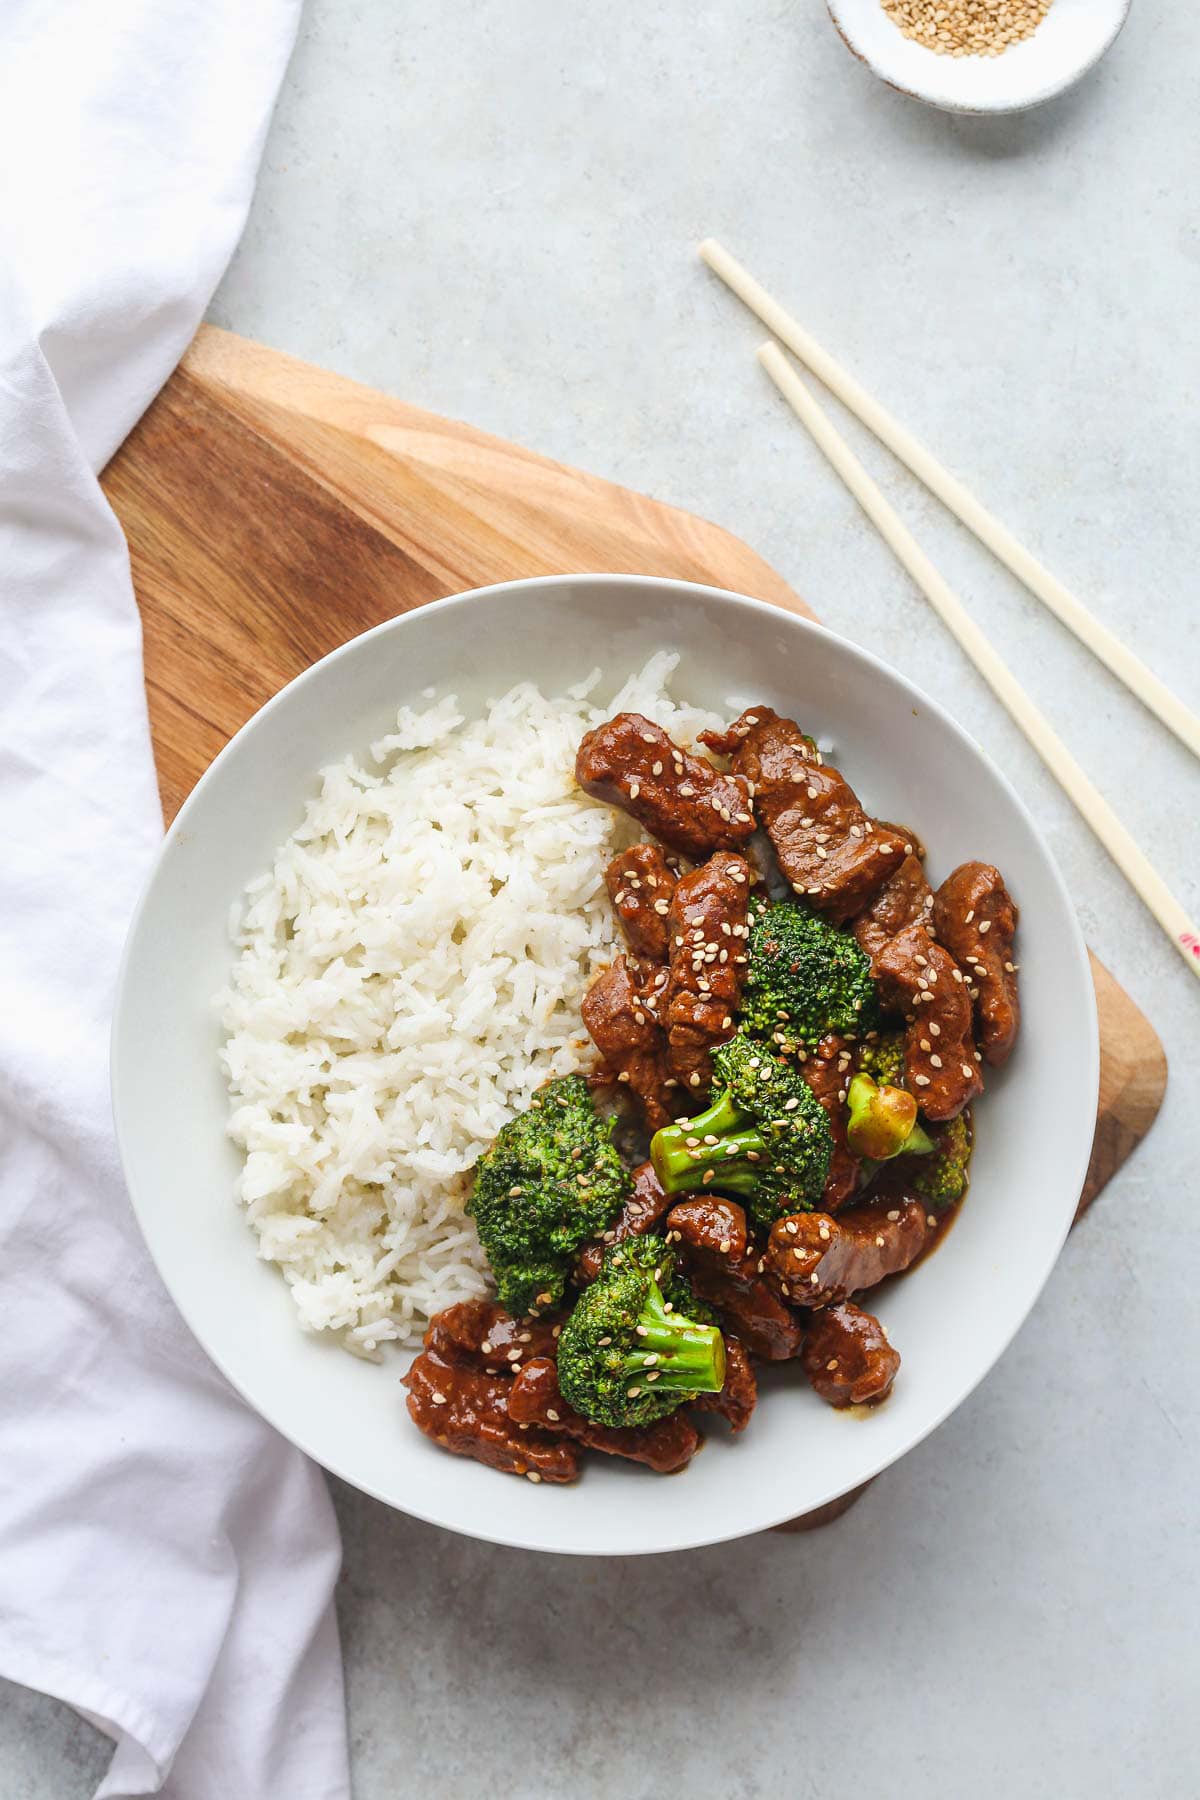 A white bowl with white rice, and beef and broccoli garnished with toasted sesame seeds. With chop sticks on the side